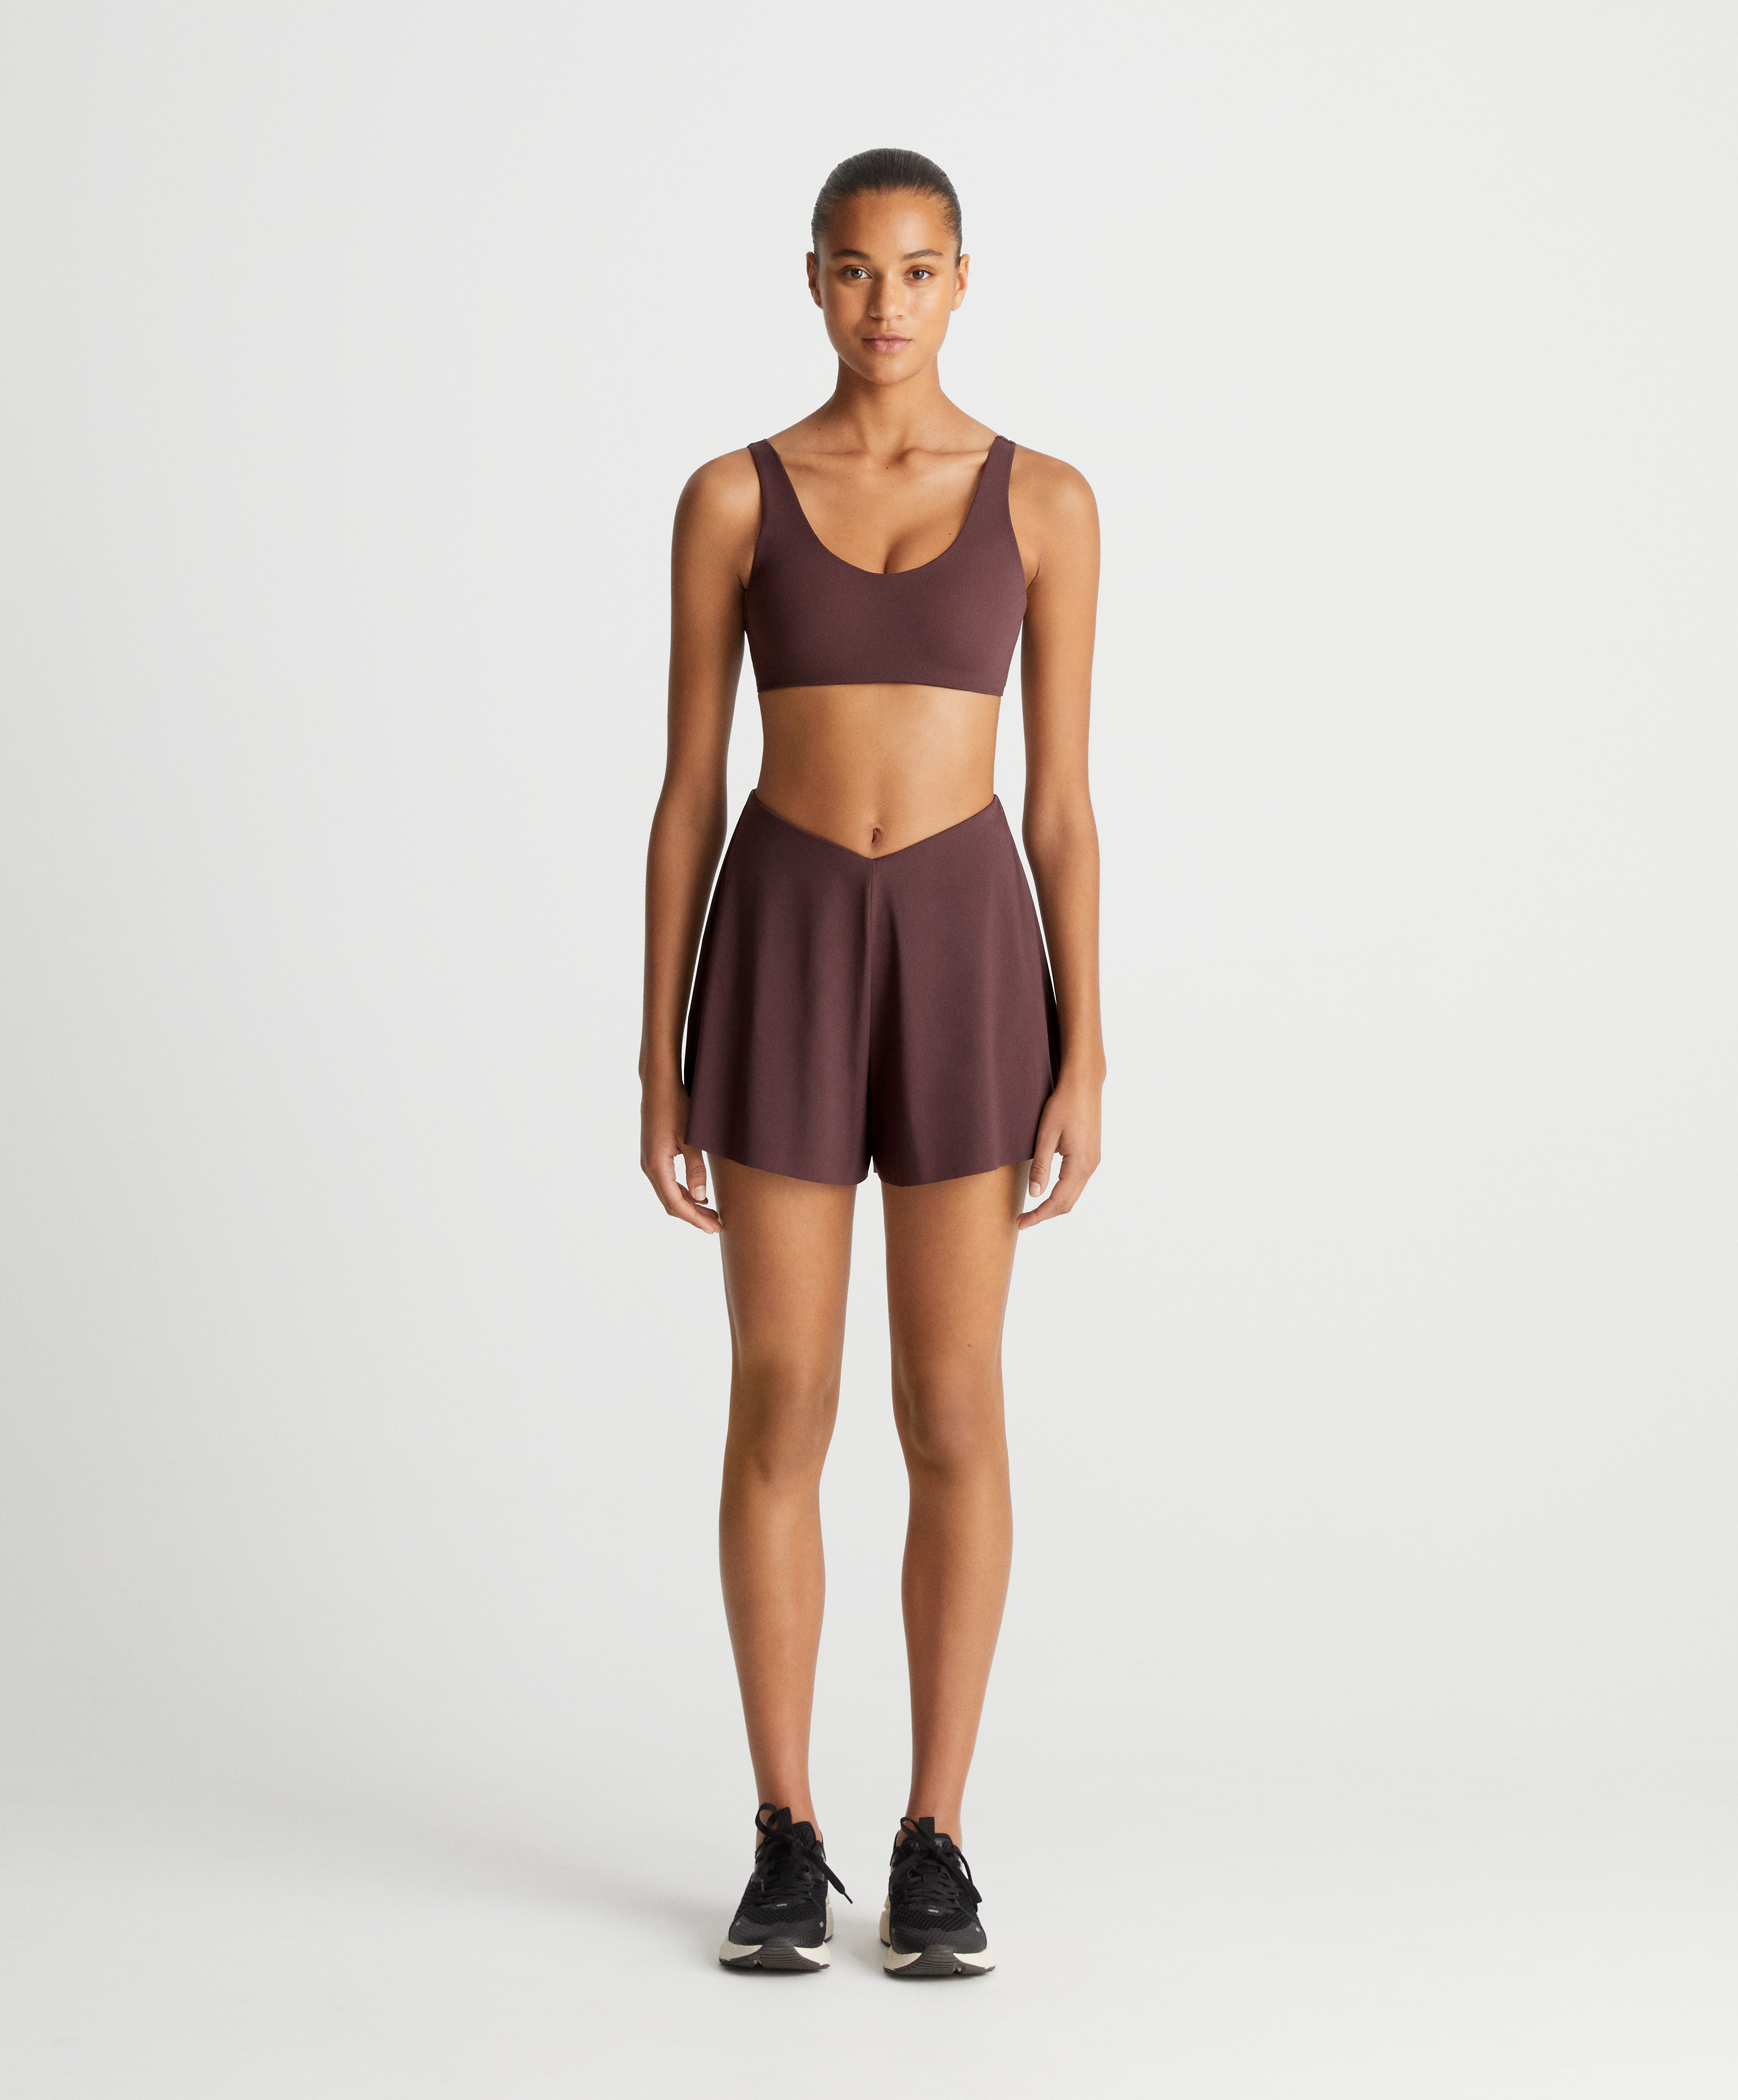 Total look shorts light touch marrons